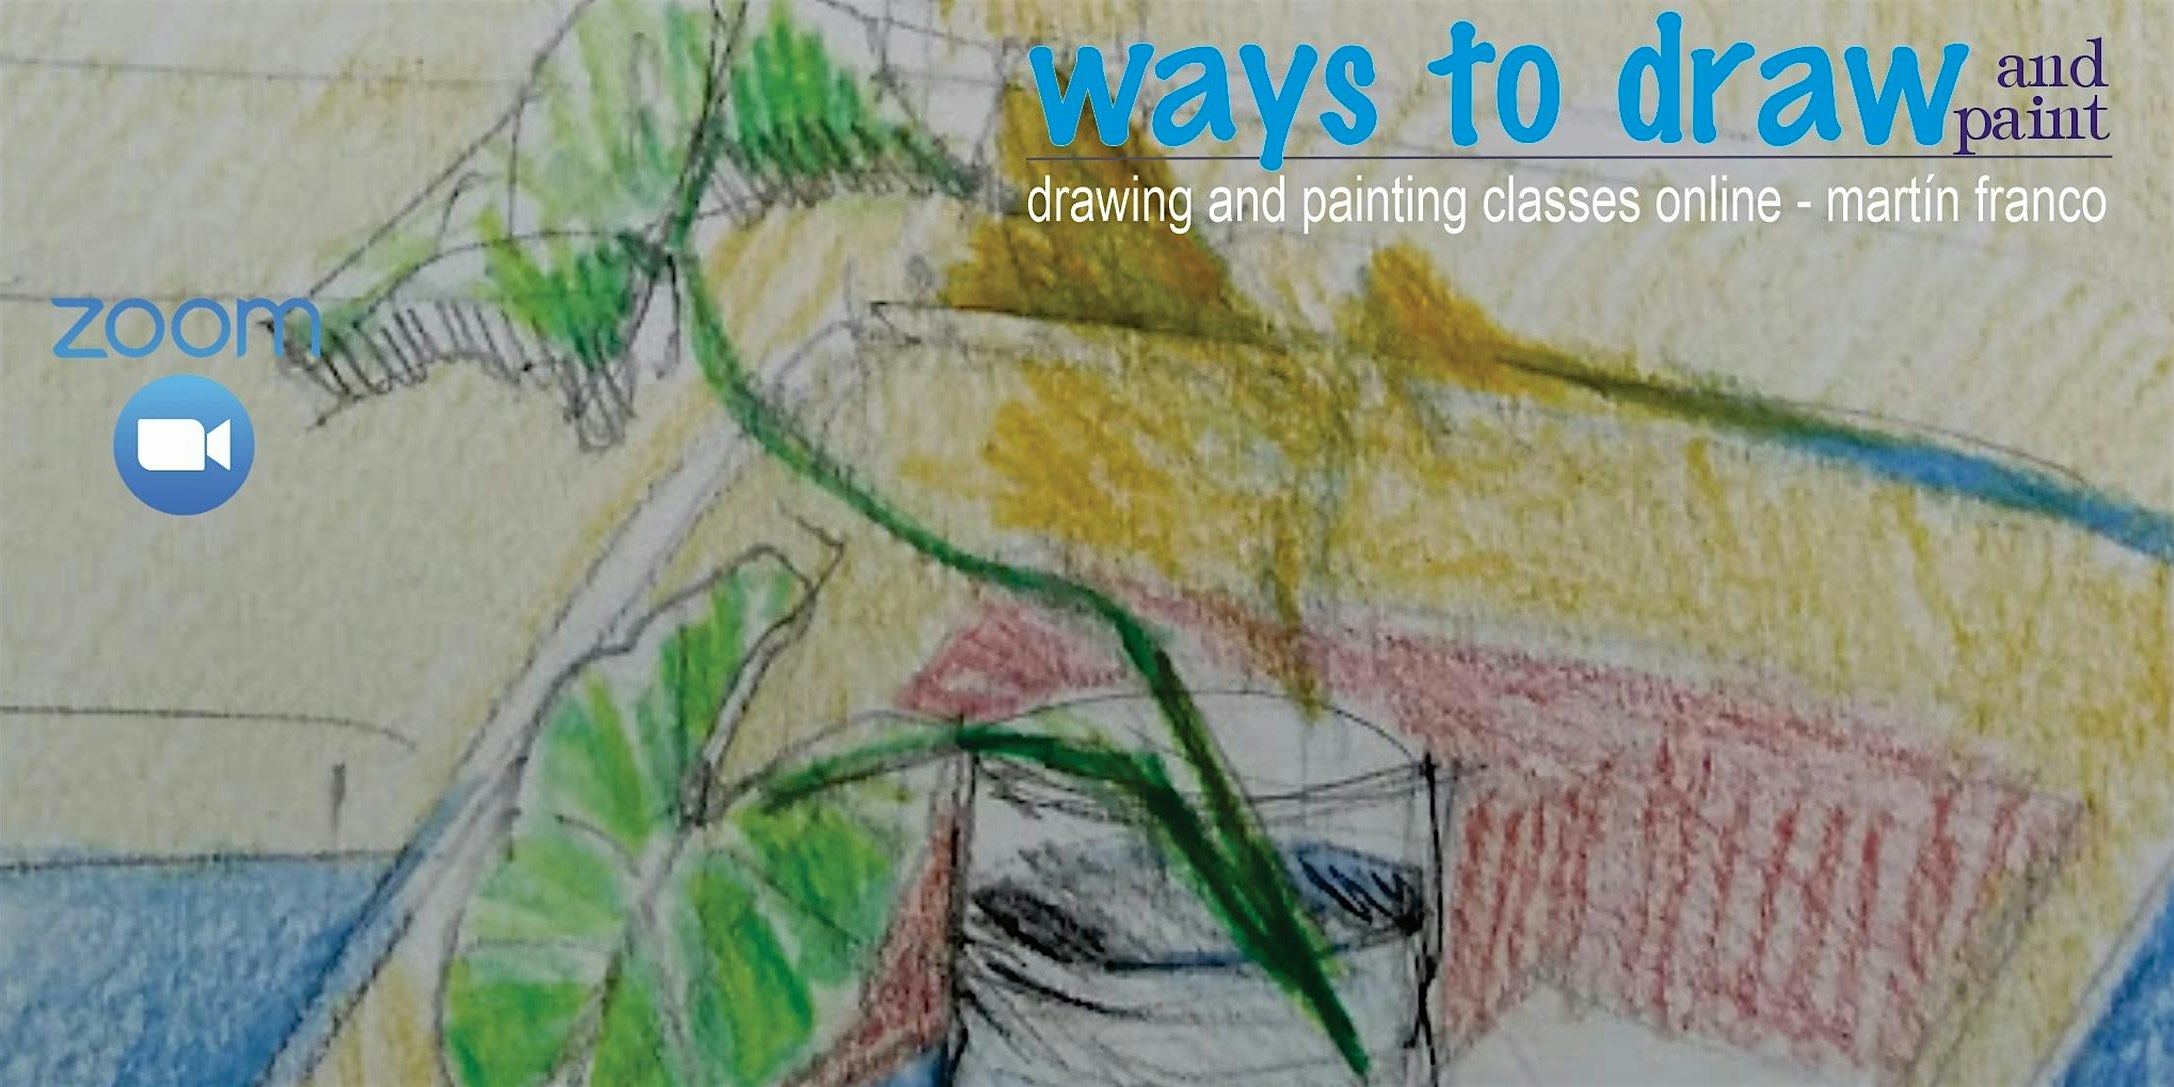 DRAWING with Colored Pencils - dibujofranco - art classes online (WTD61)